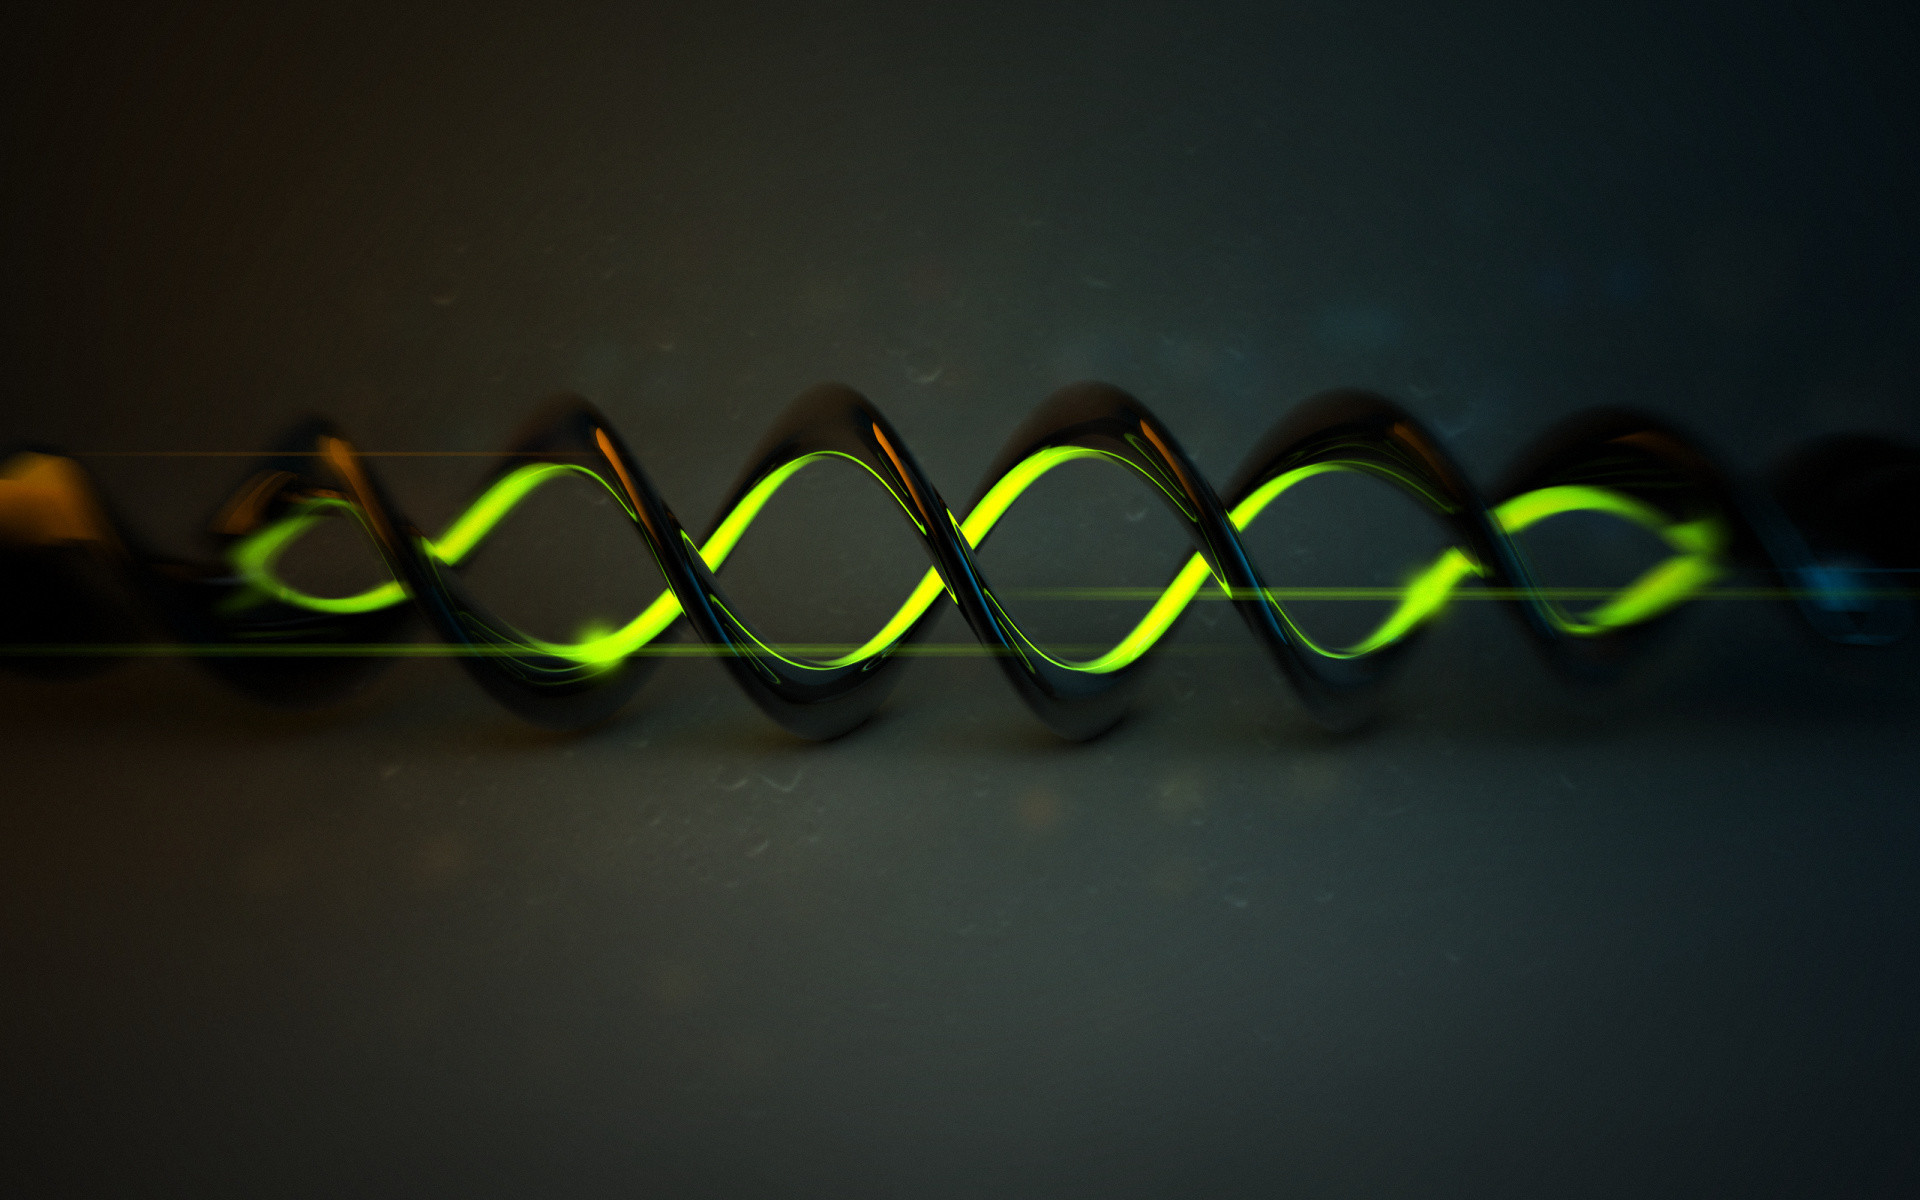 1920x1200 1000+ images about DNA on Pinterest | Taps, Double helix and Free .